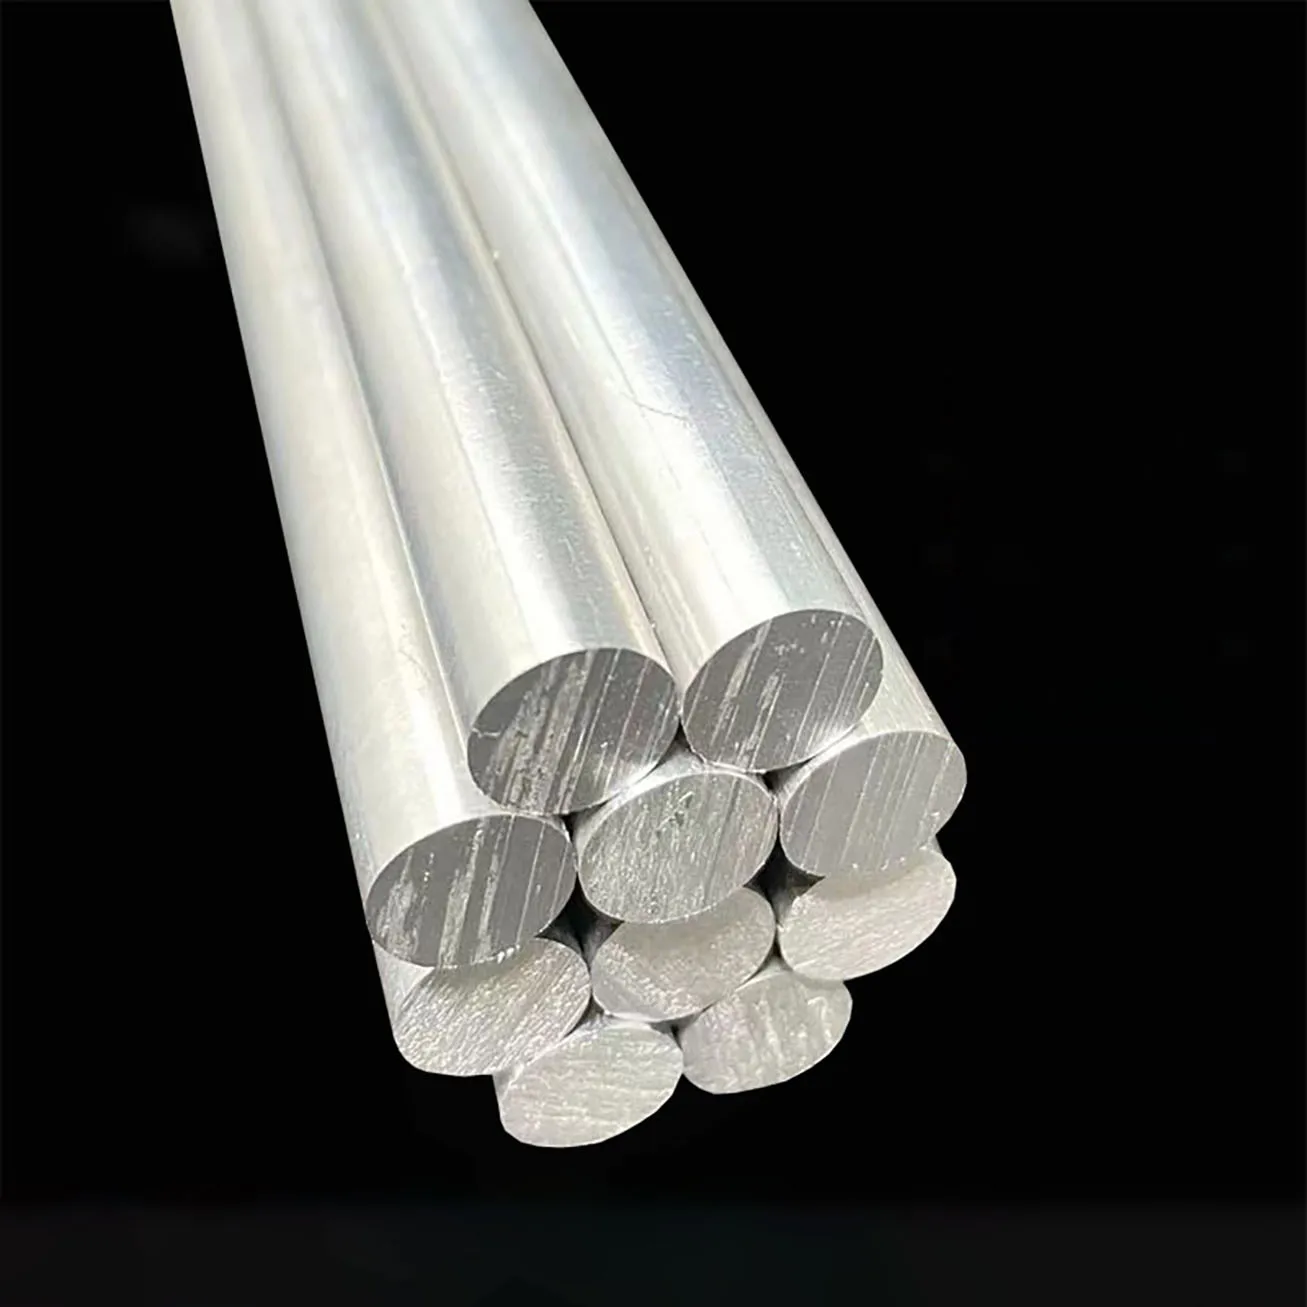 Solid Diameter Of Aluminum Rod: 2.5mm 3mm 4mm 5mm 6mm 7mm 8mm 9mm 10mm to 35mm, Customized For Processing